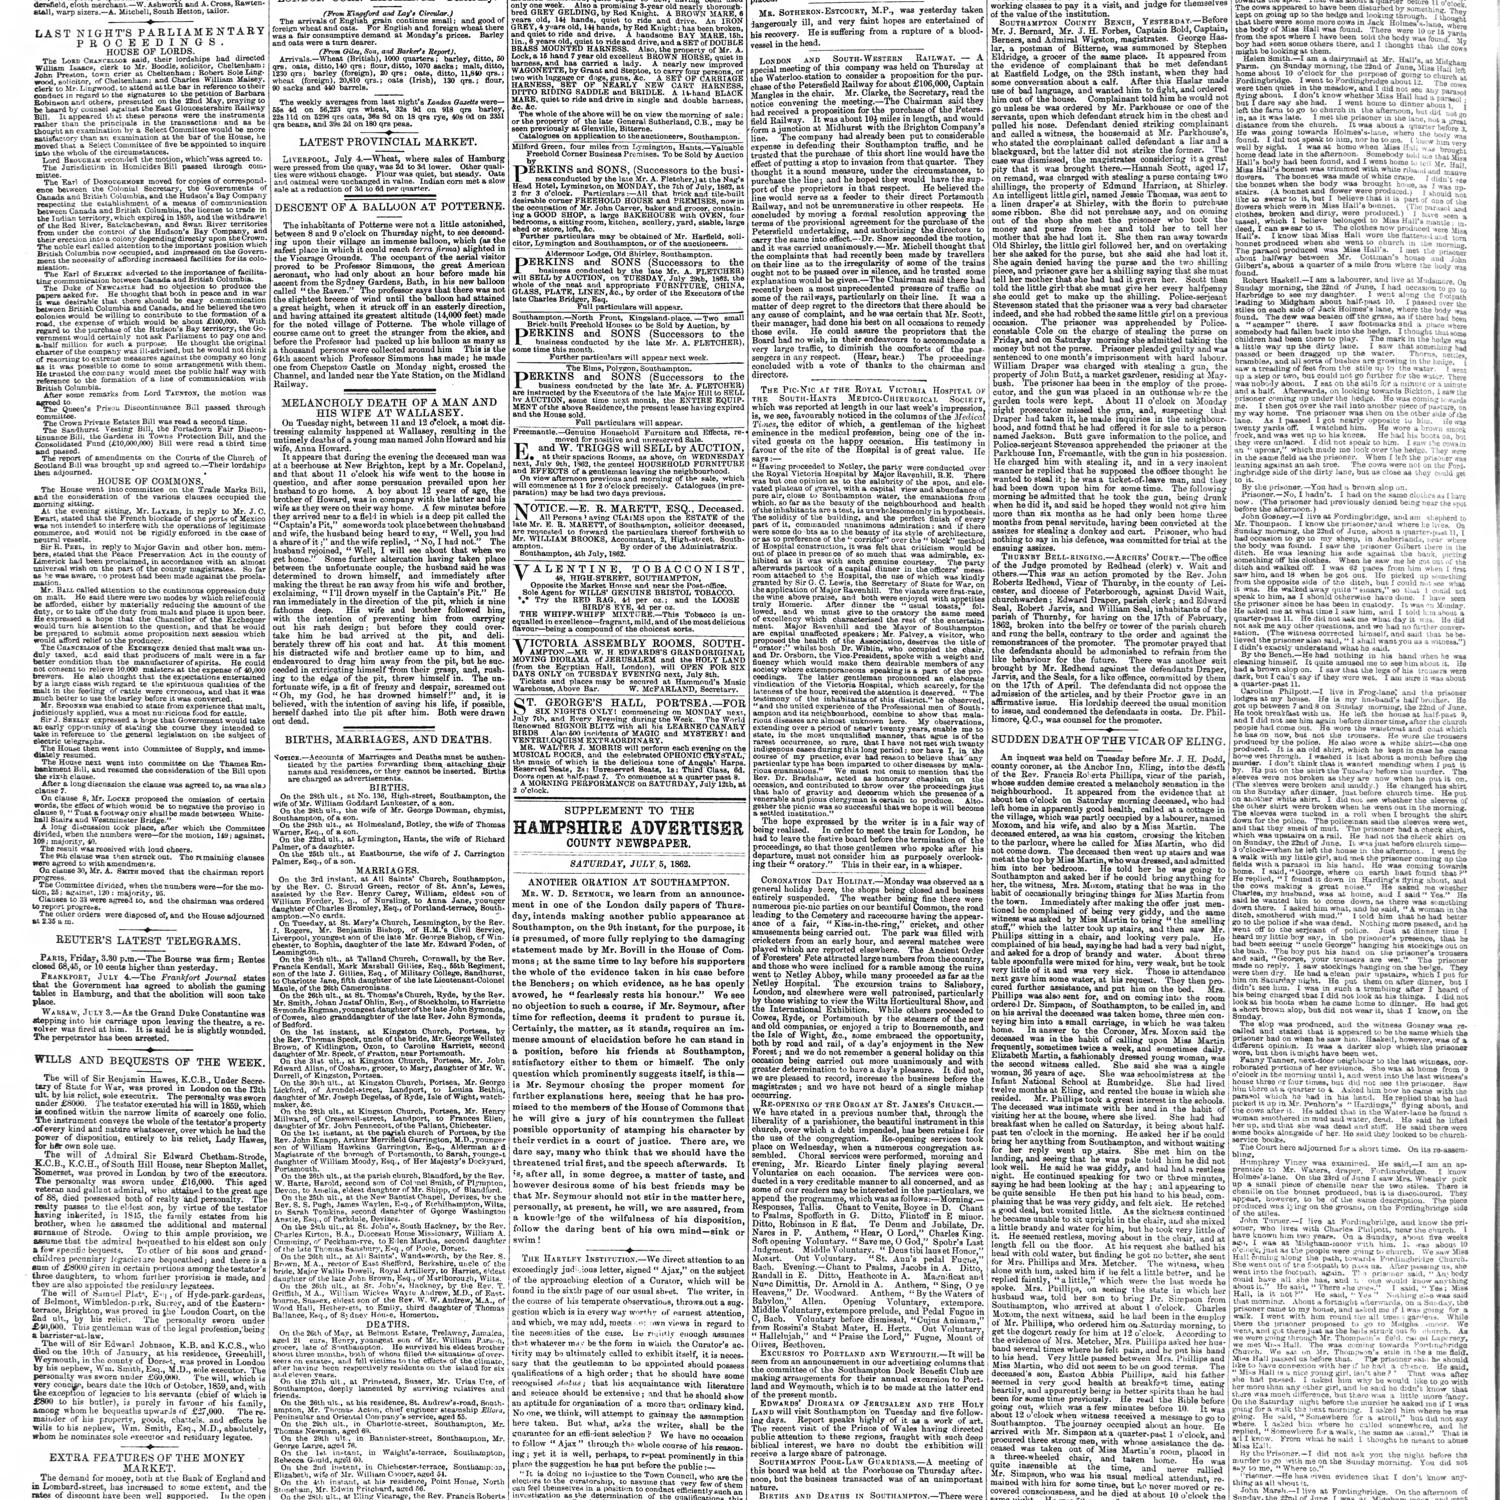 The Hampshire Advertiser, 1862-07-05, page 2